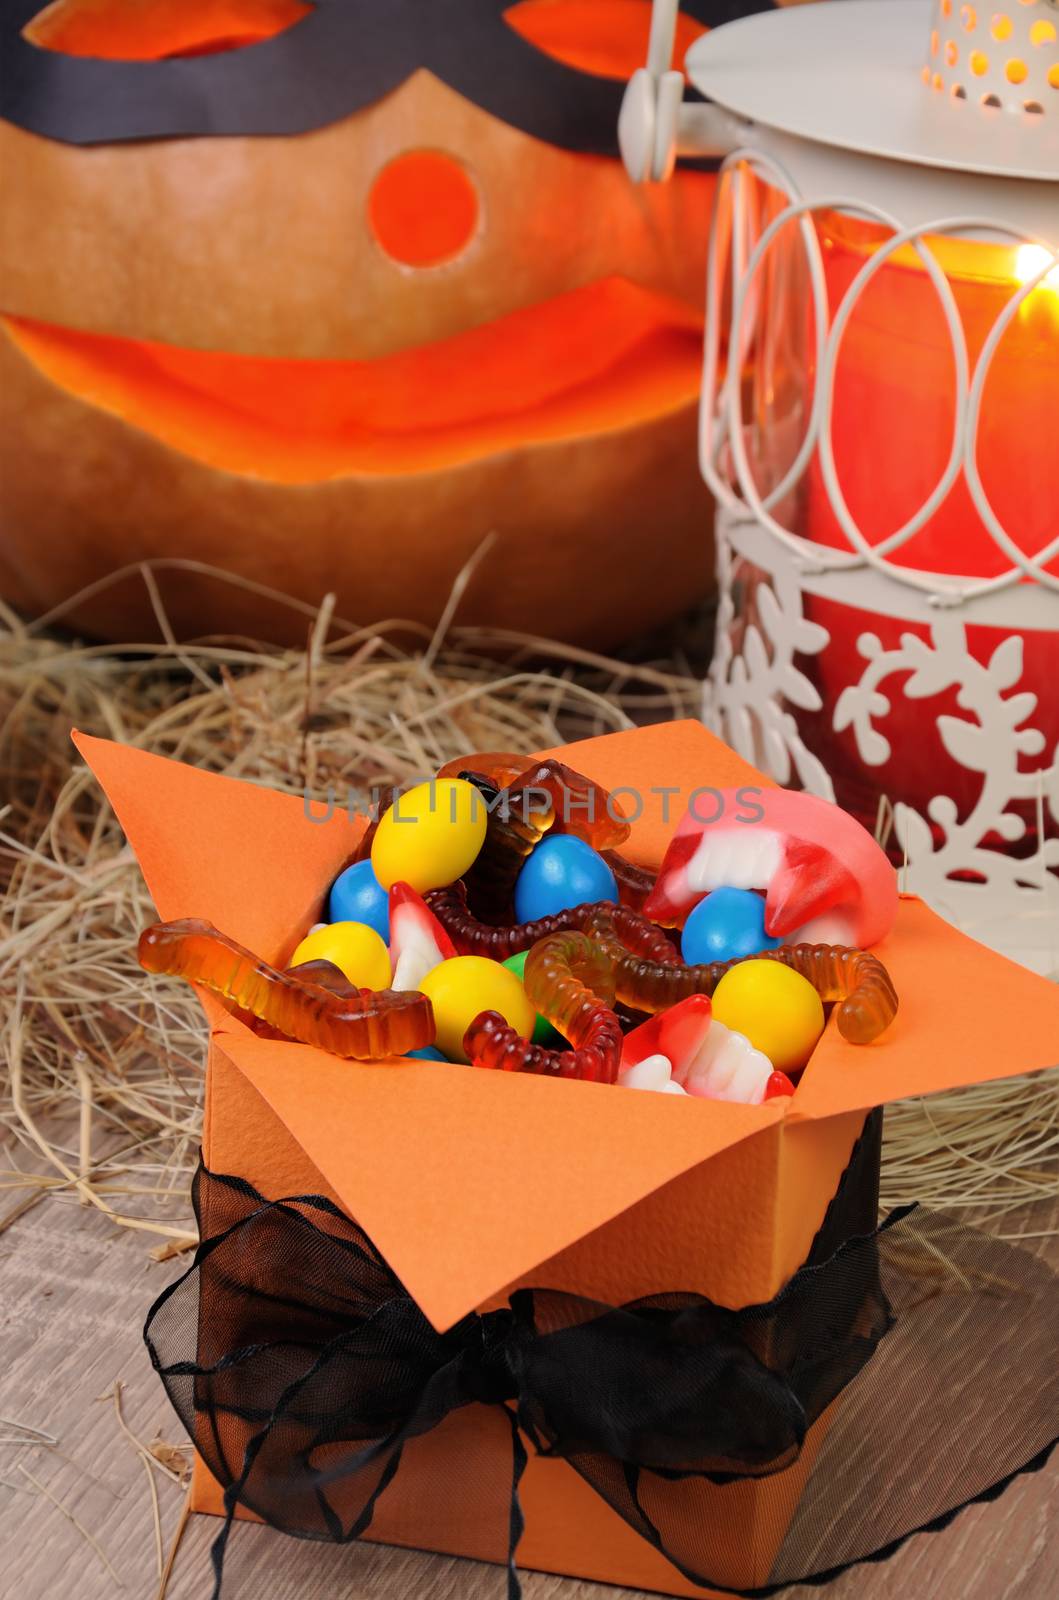 box filled with a variety of sweets on the table for Halloween